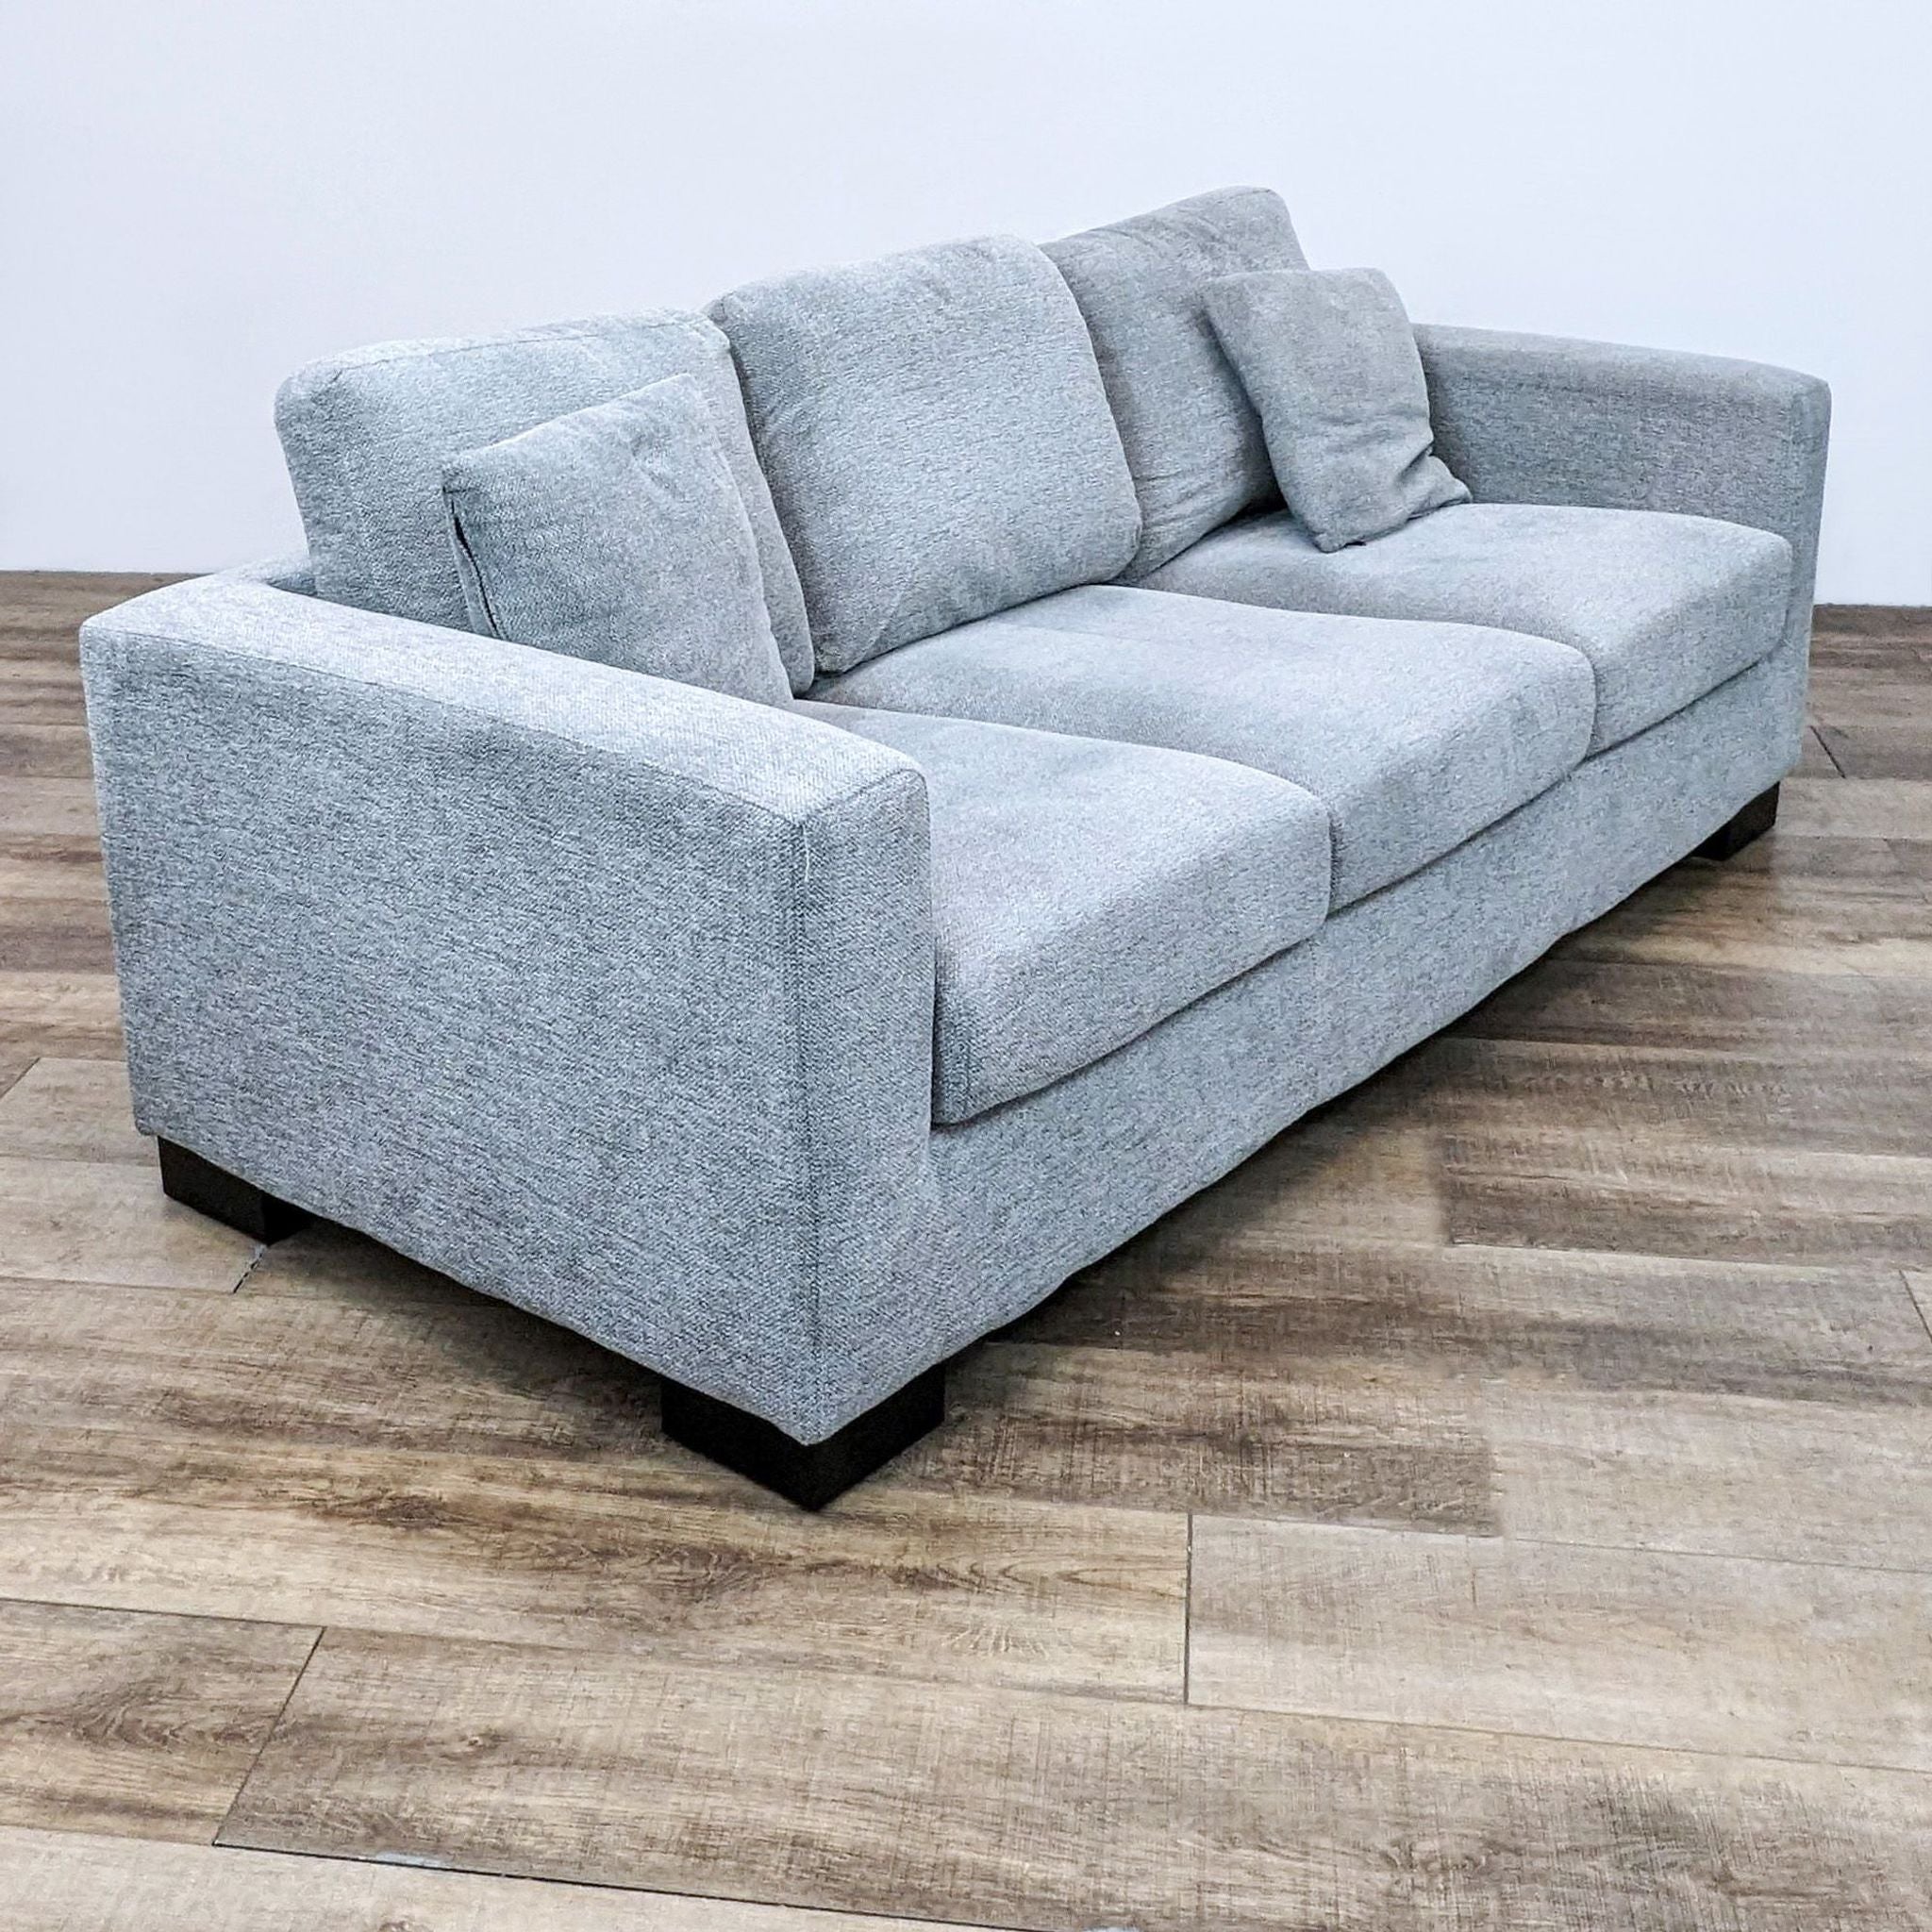 Three-seater Reperch sofa in gray with dark wood block feet and comfortable cushions, positioned on wooden flooring.